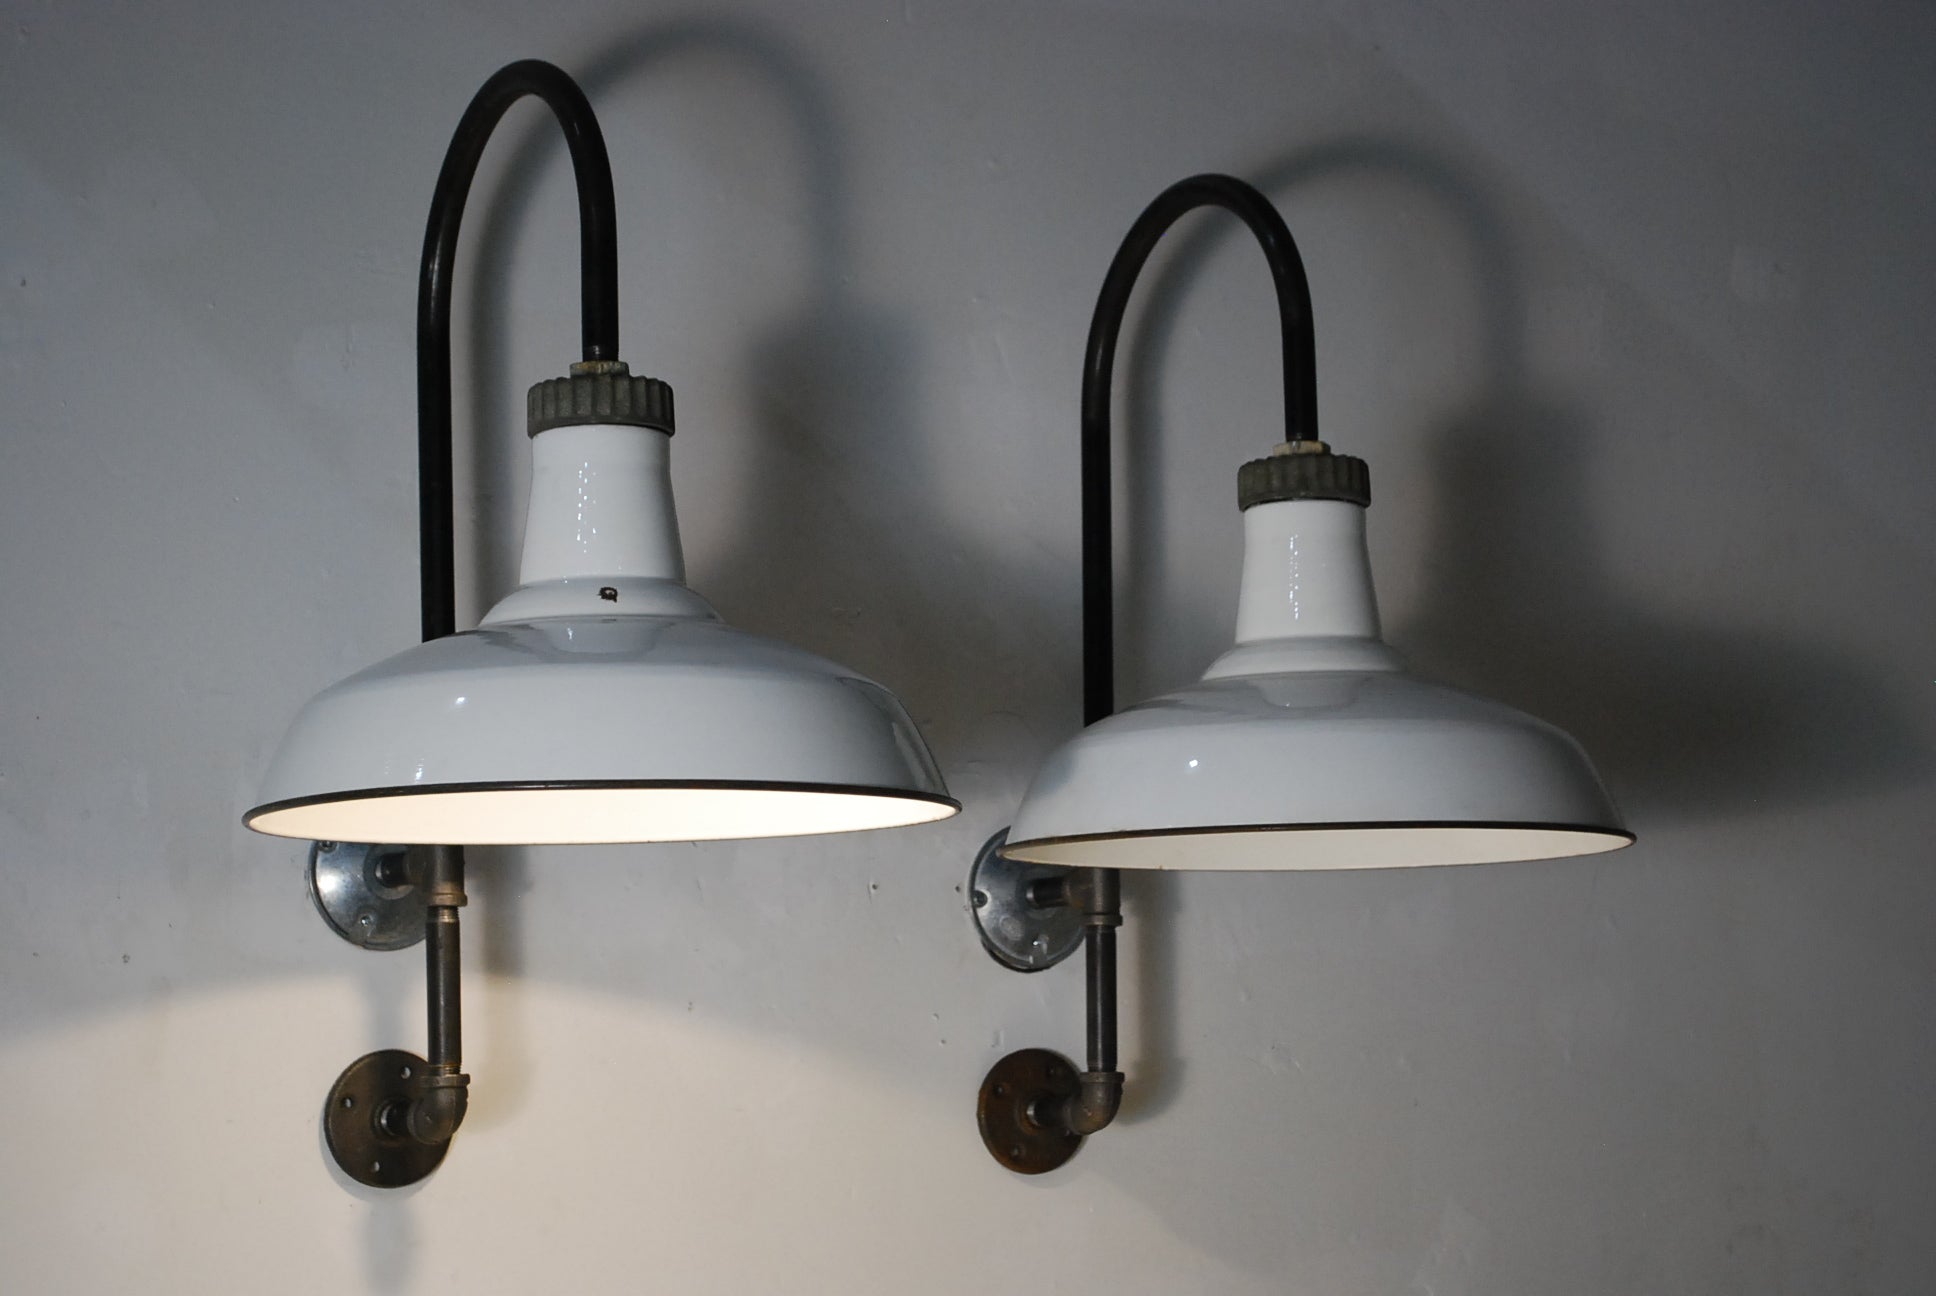 1940 set of industrial barn style sconces | Scott Landon Antiques and Interiors.